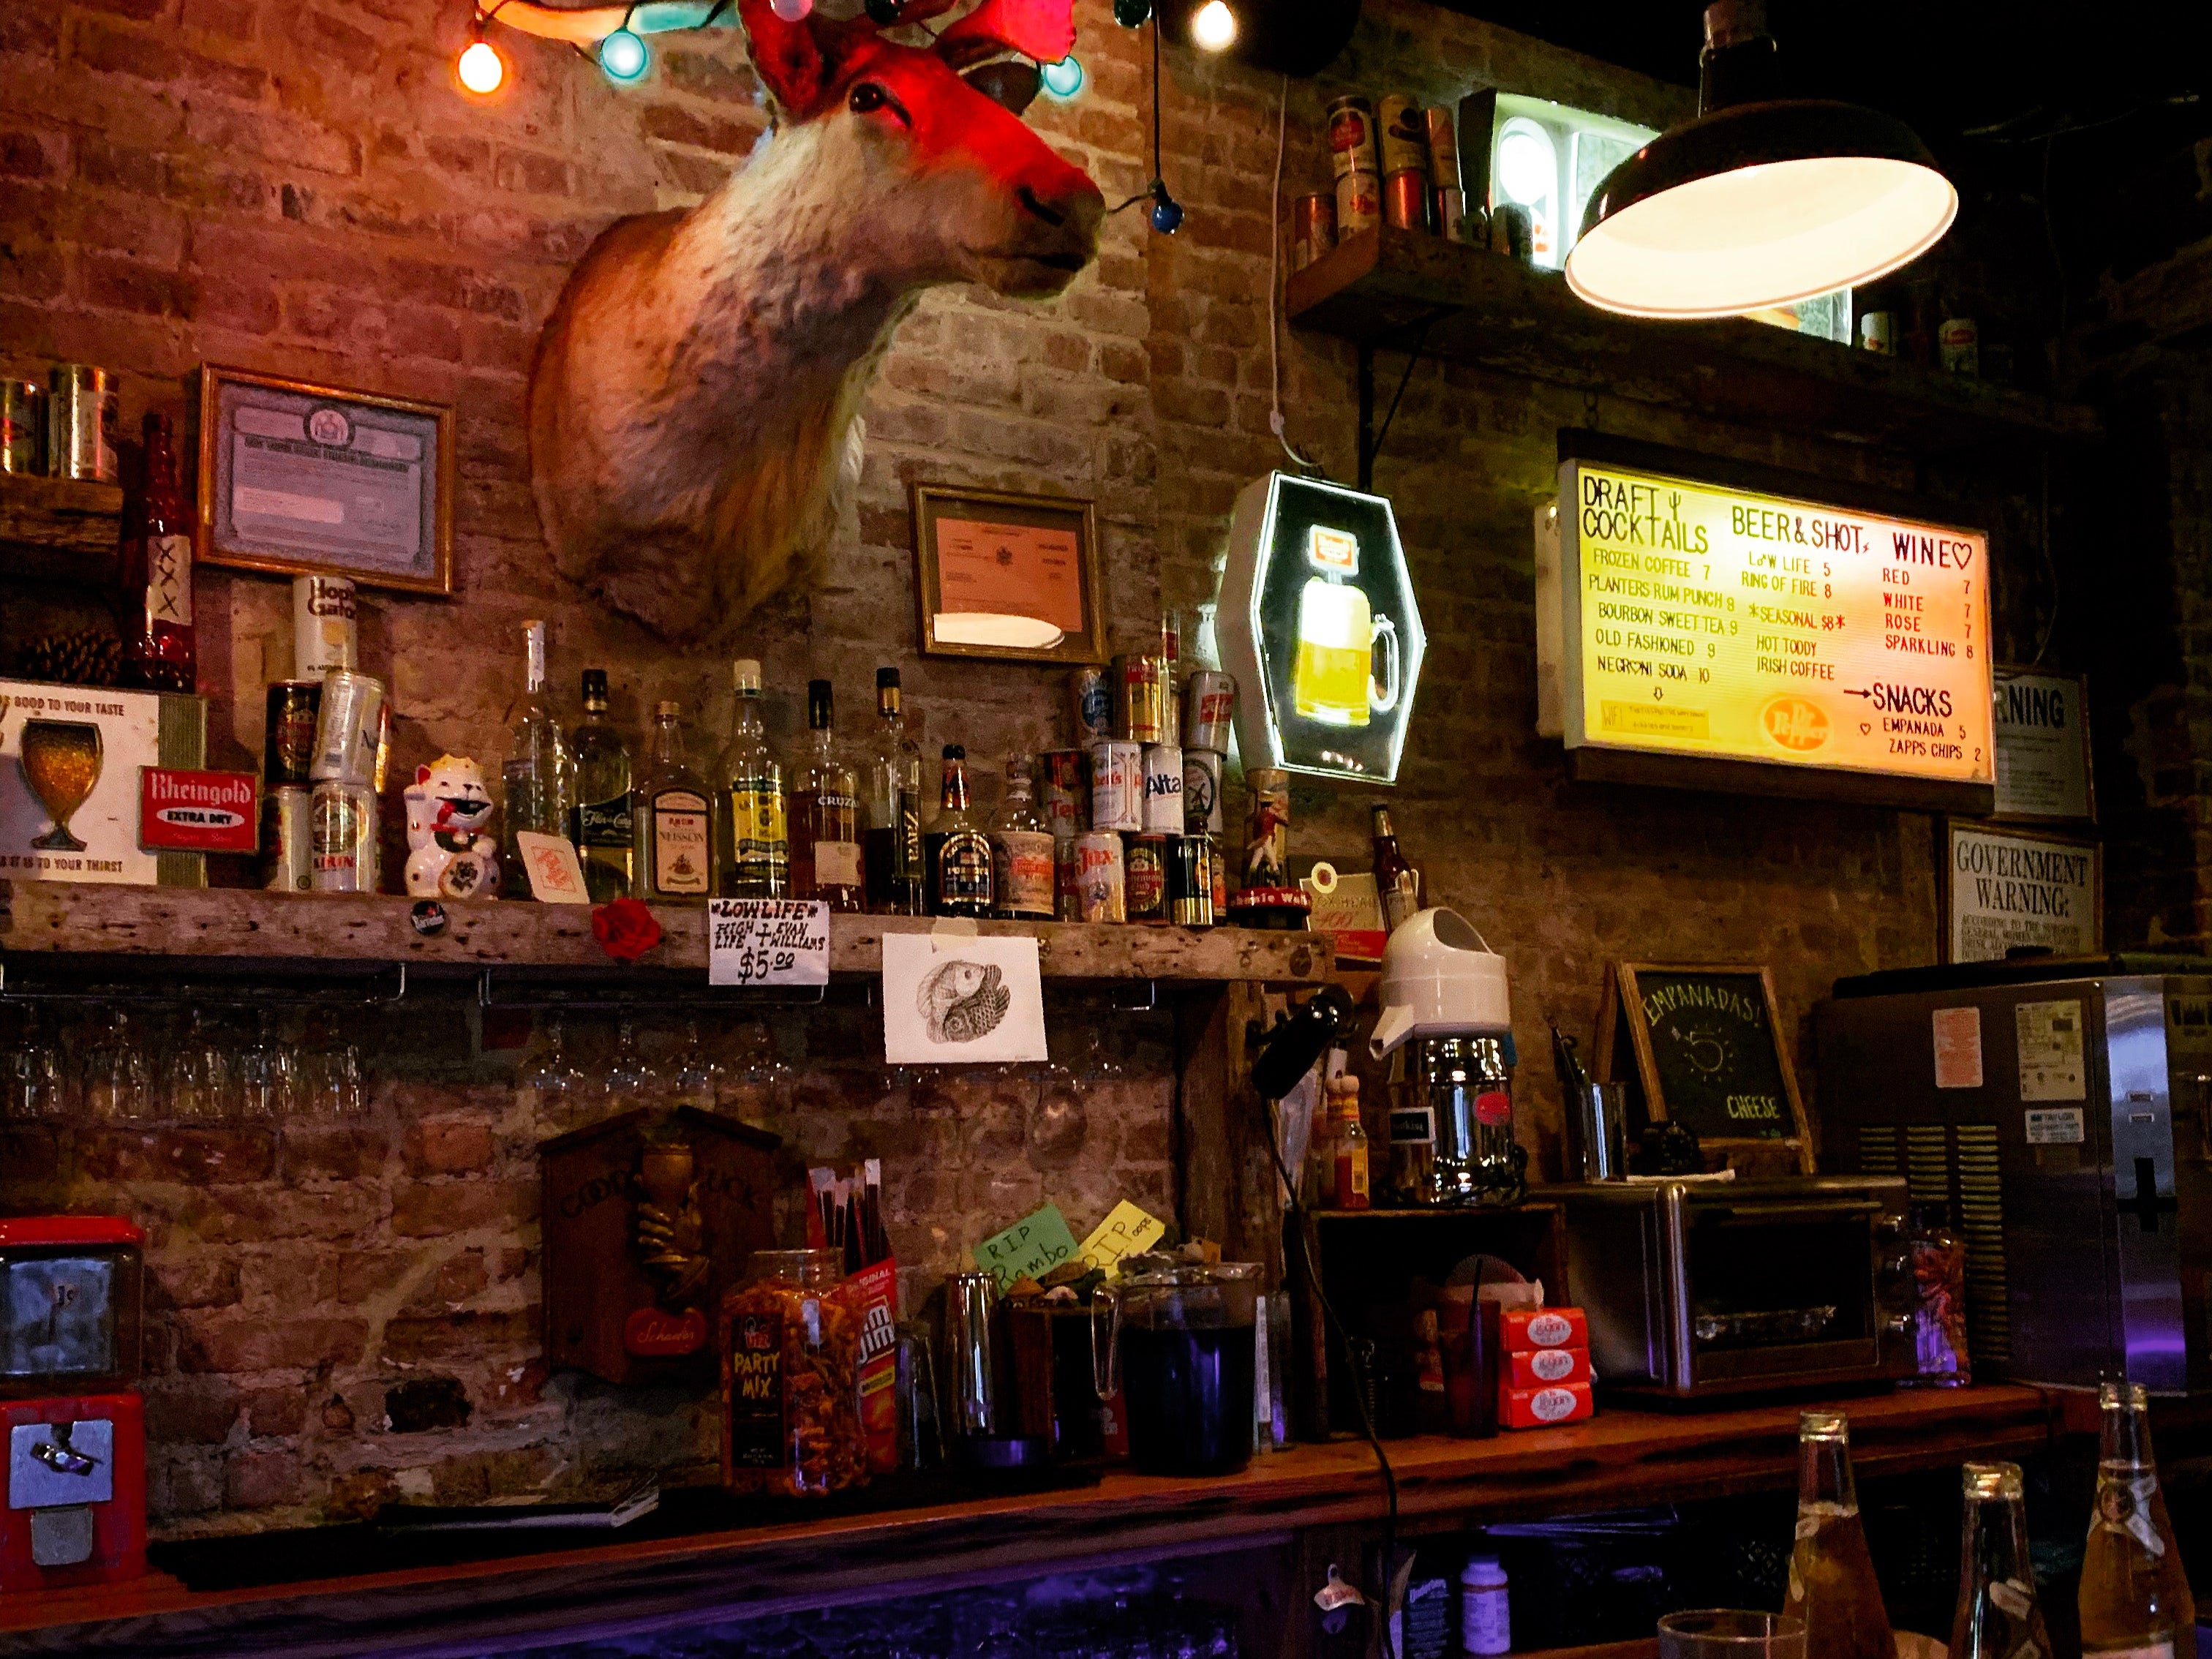 Near and deer: the bar, complete with toy stag’s head